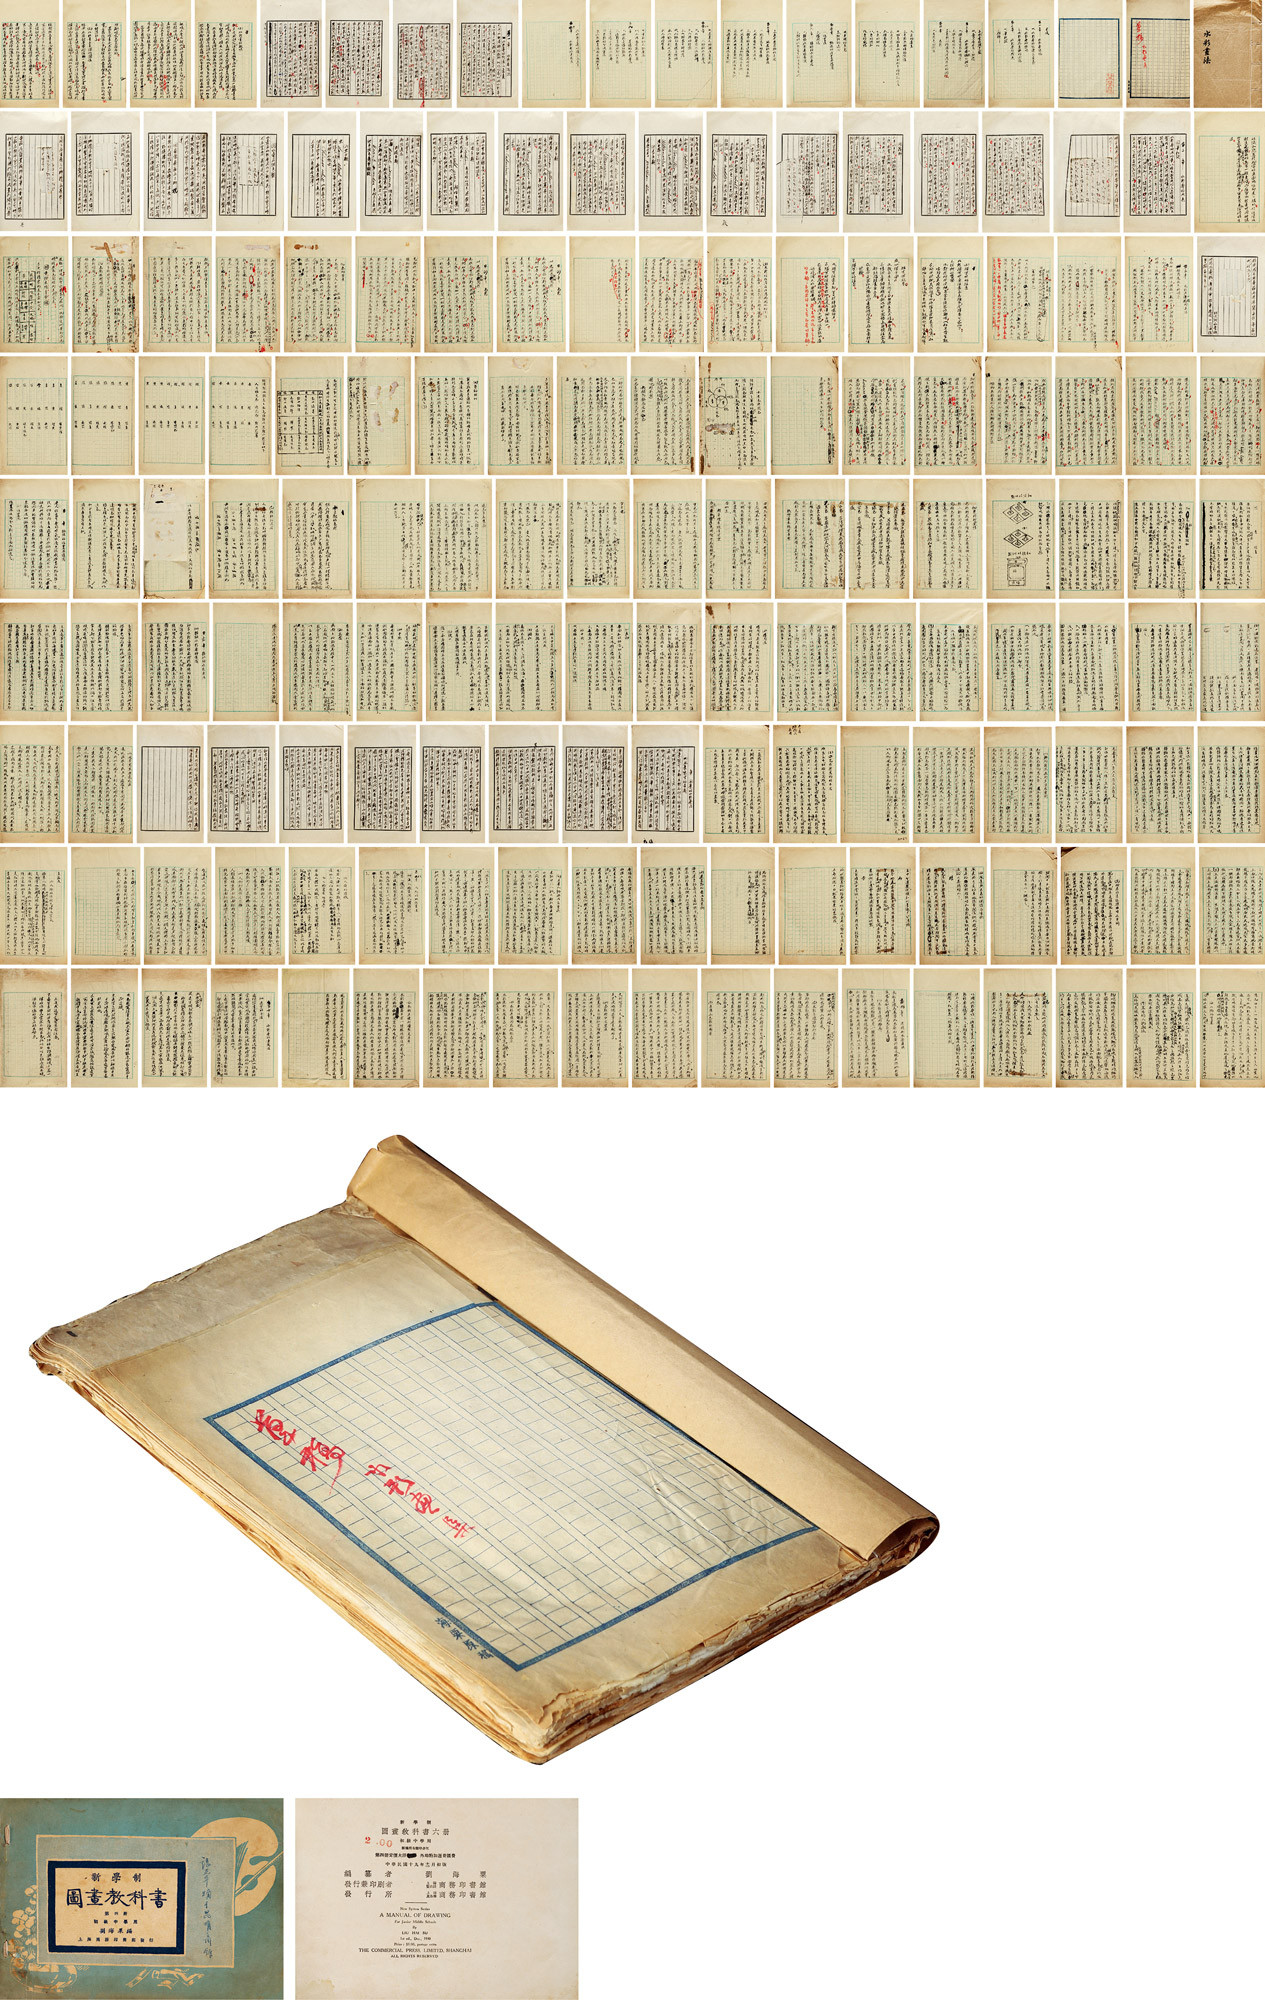 The original manuscript of the textbook “Watercolor Painting” for junior high school in 1930 in Liu Haisu’s own handwriting 162 pages in 1 volume with publications